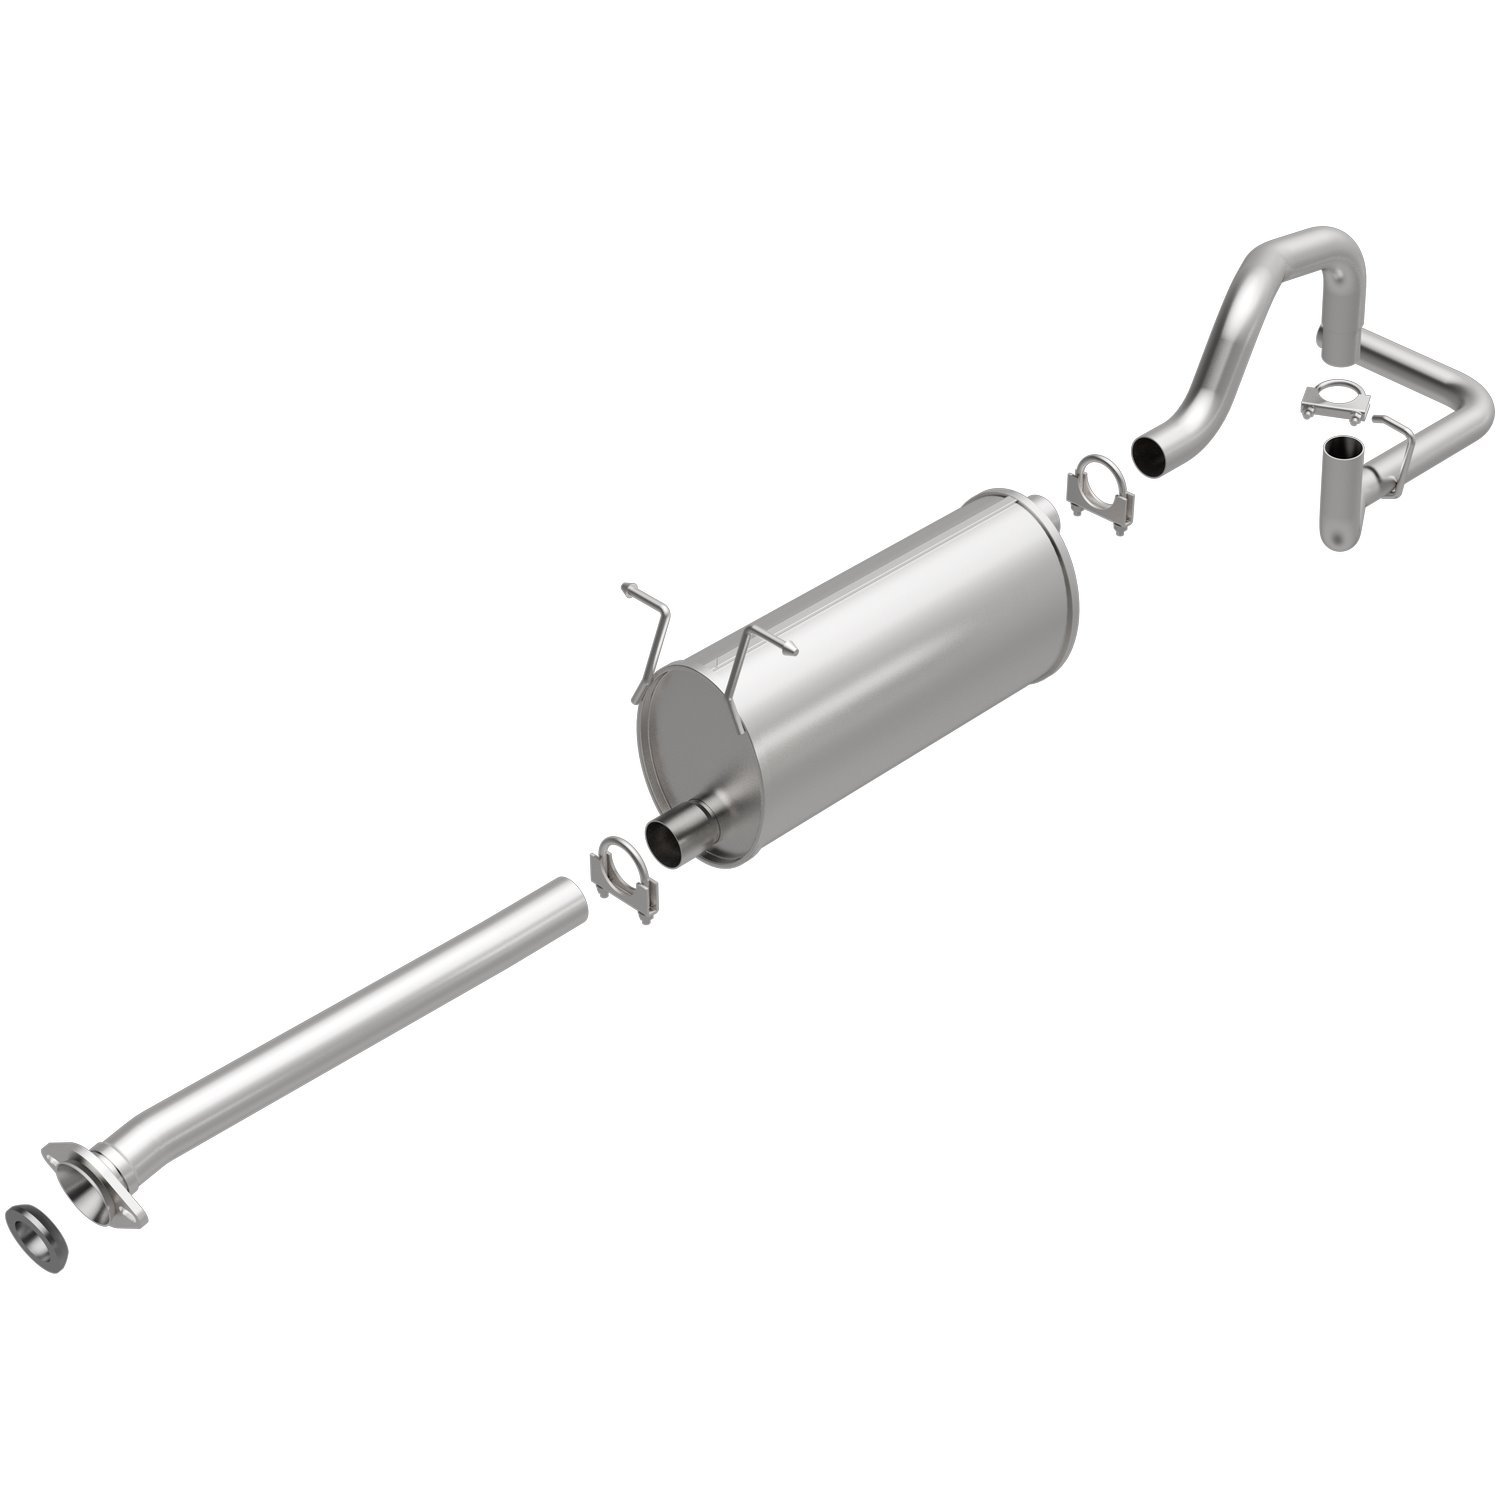 Direct-Fit Exhaust Kit, 2004-2011 Ford Ranger, Mazda B2300